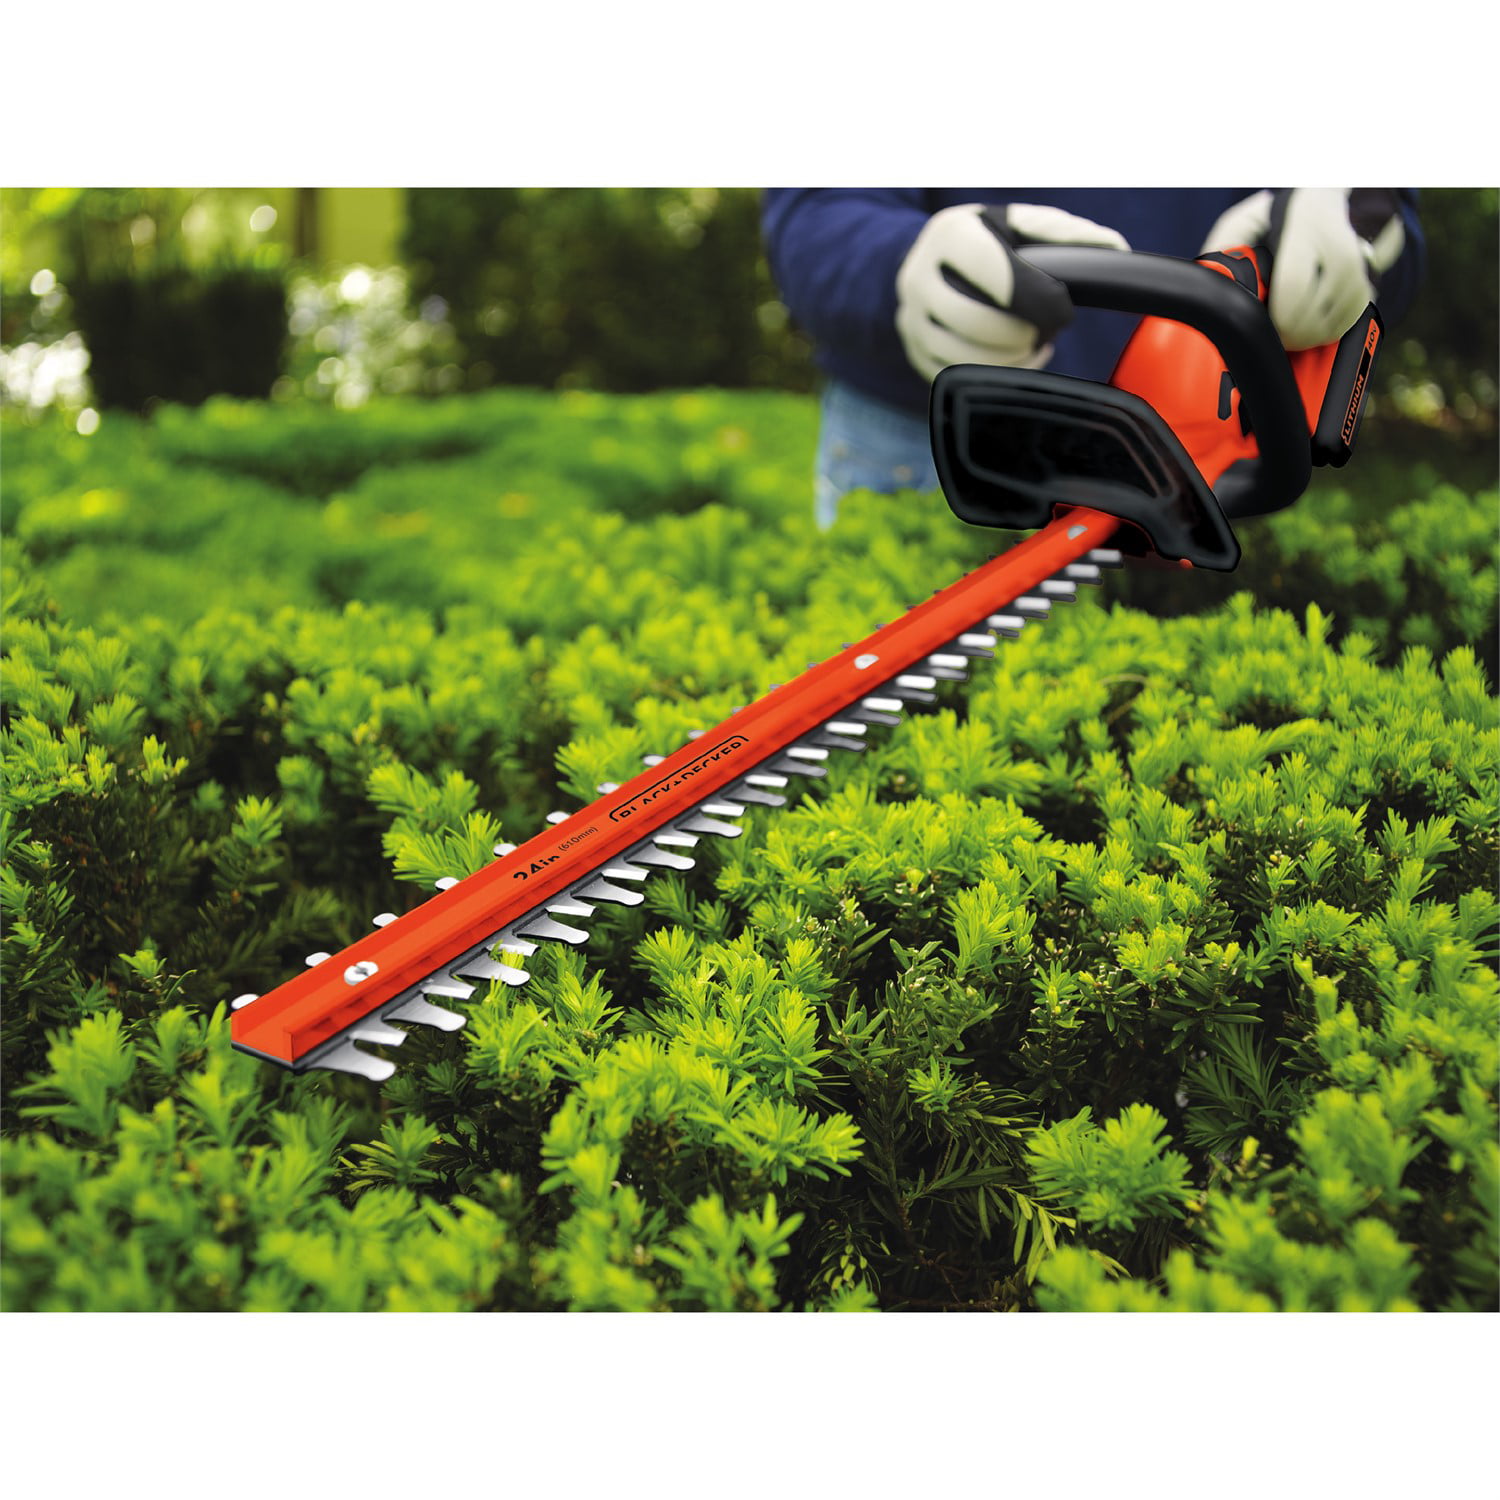 BLACK+DECKER's 40V cordless hedge trimmer returns to lowest price in 2  years for $100